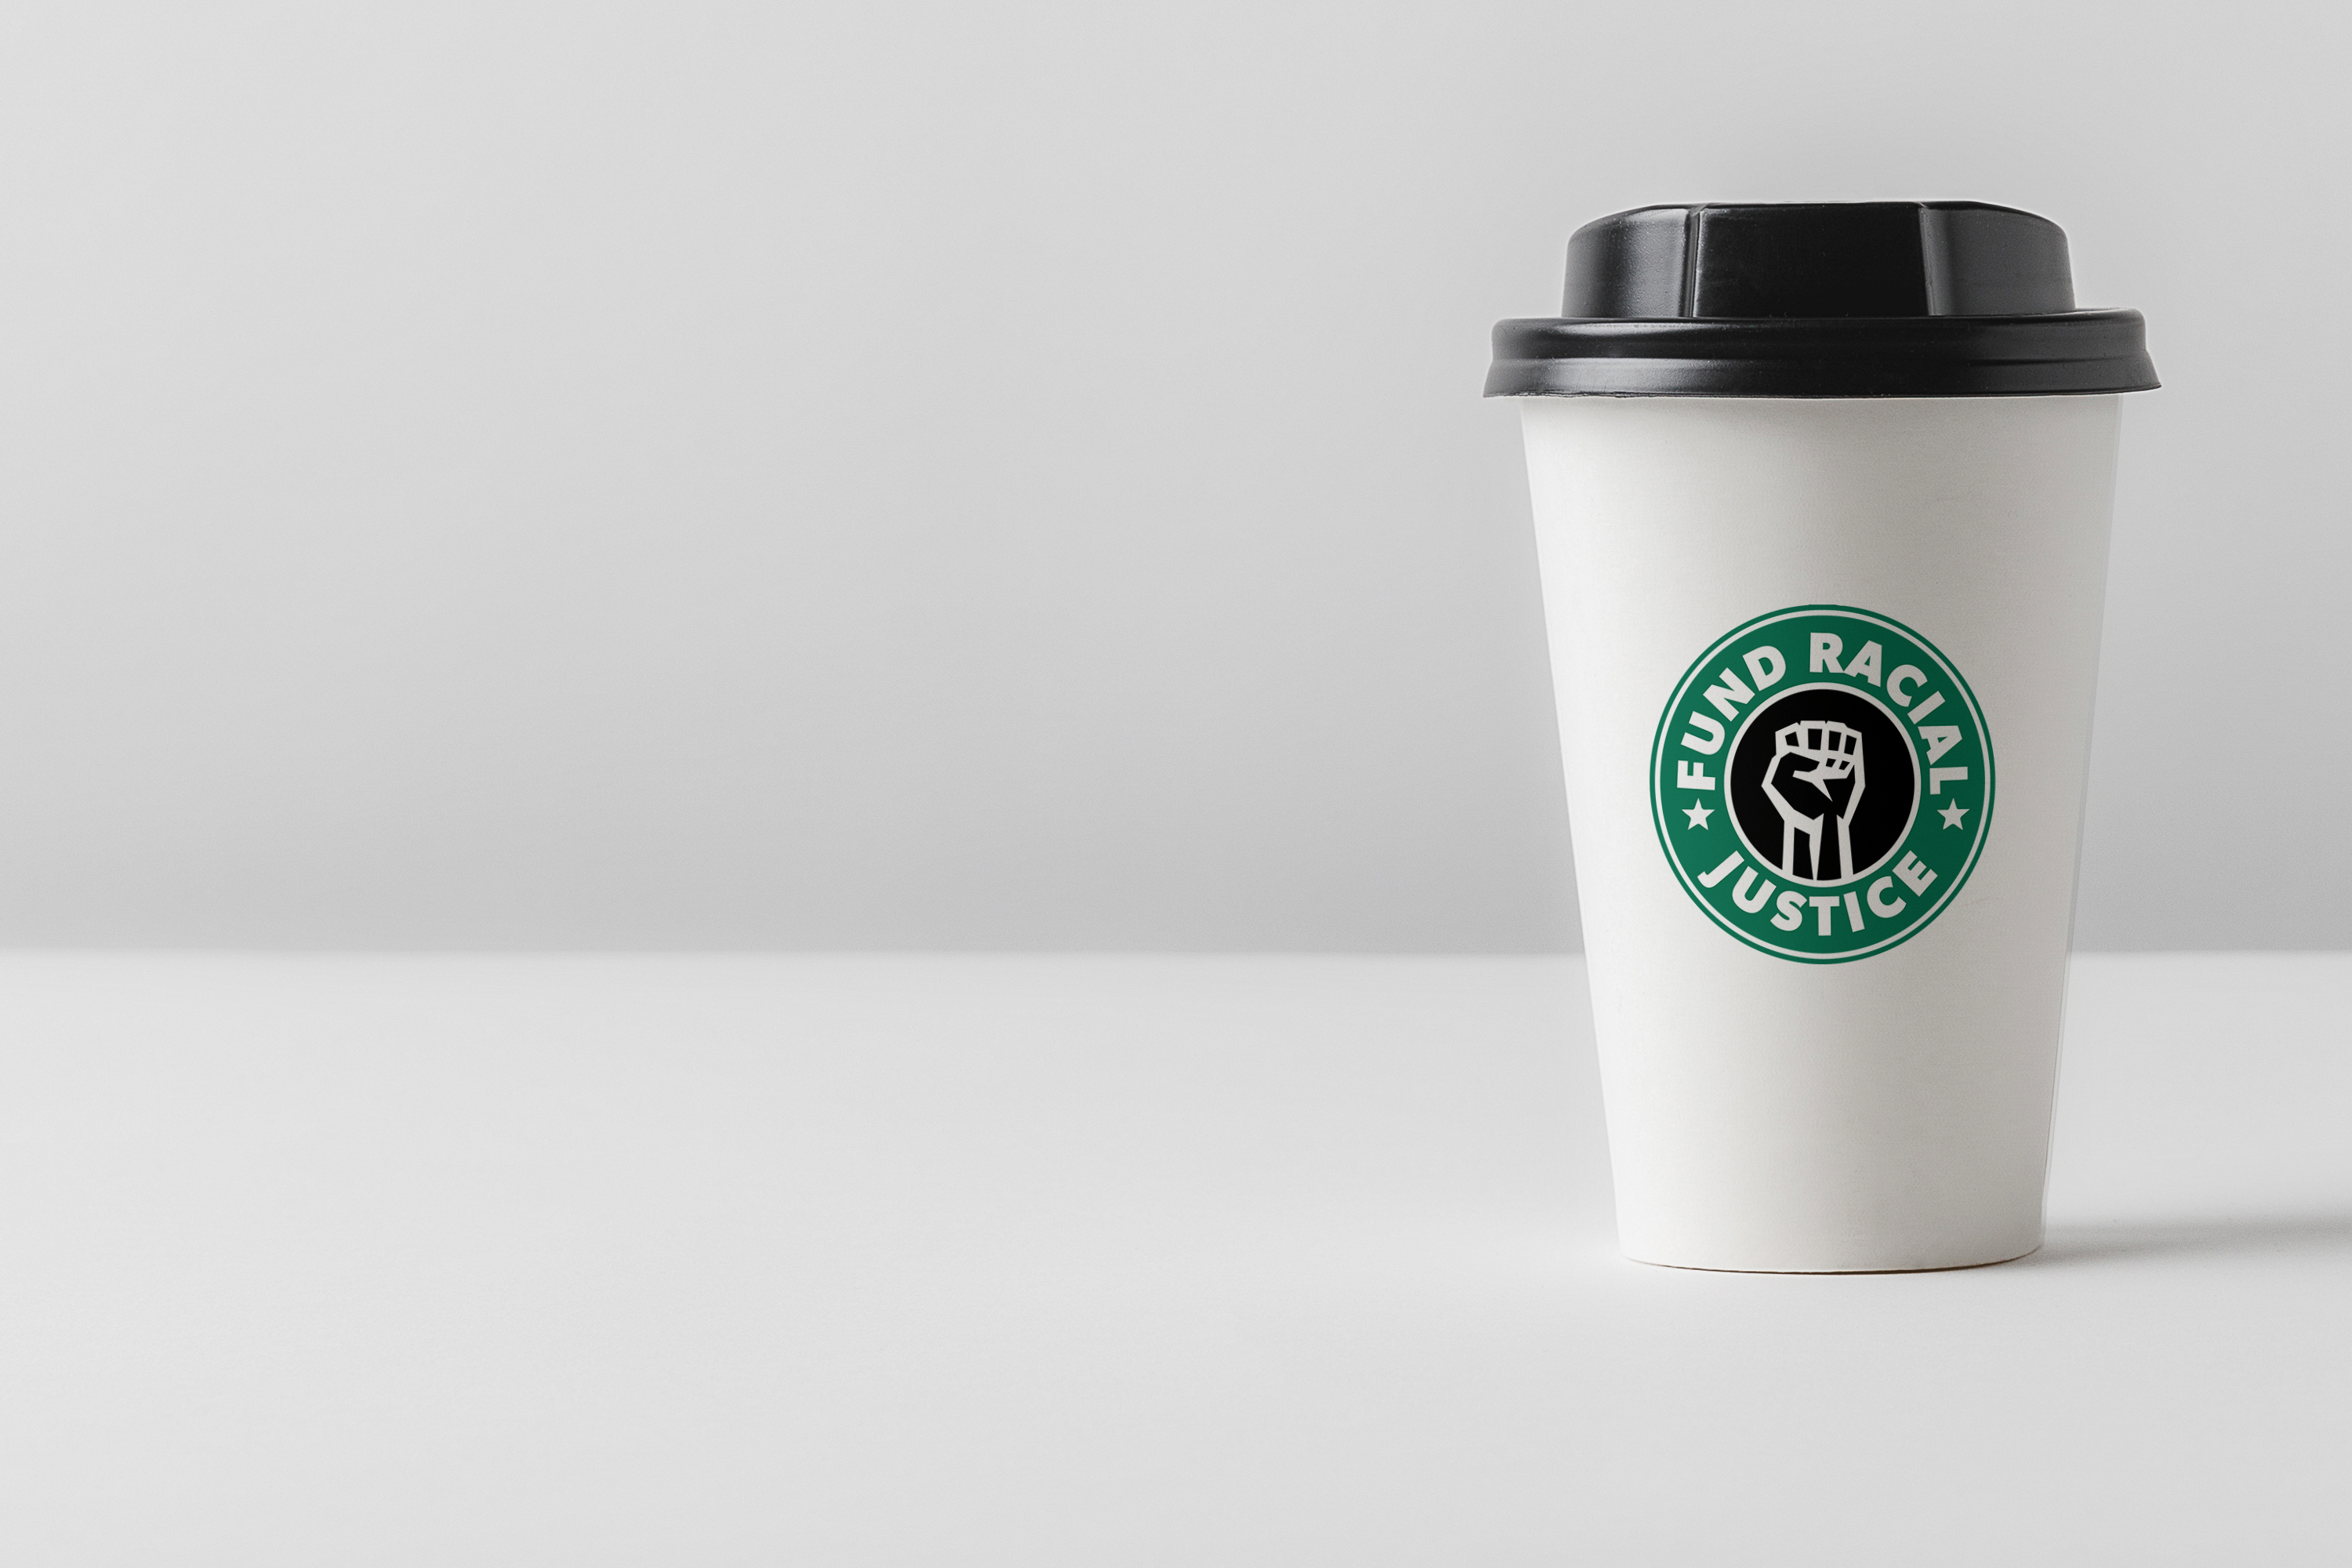 Free Coffee Cup Mockup PSD For Branding - Advancement Project - Advancement Project3000 x 2000